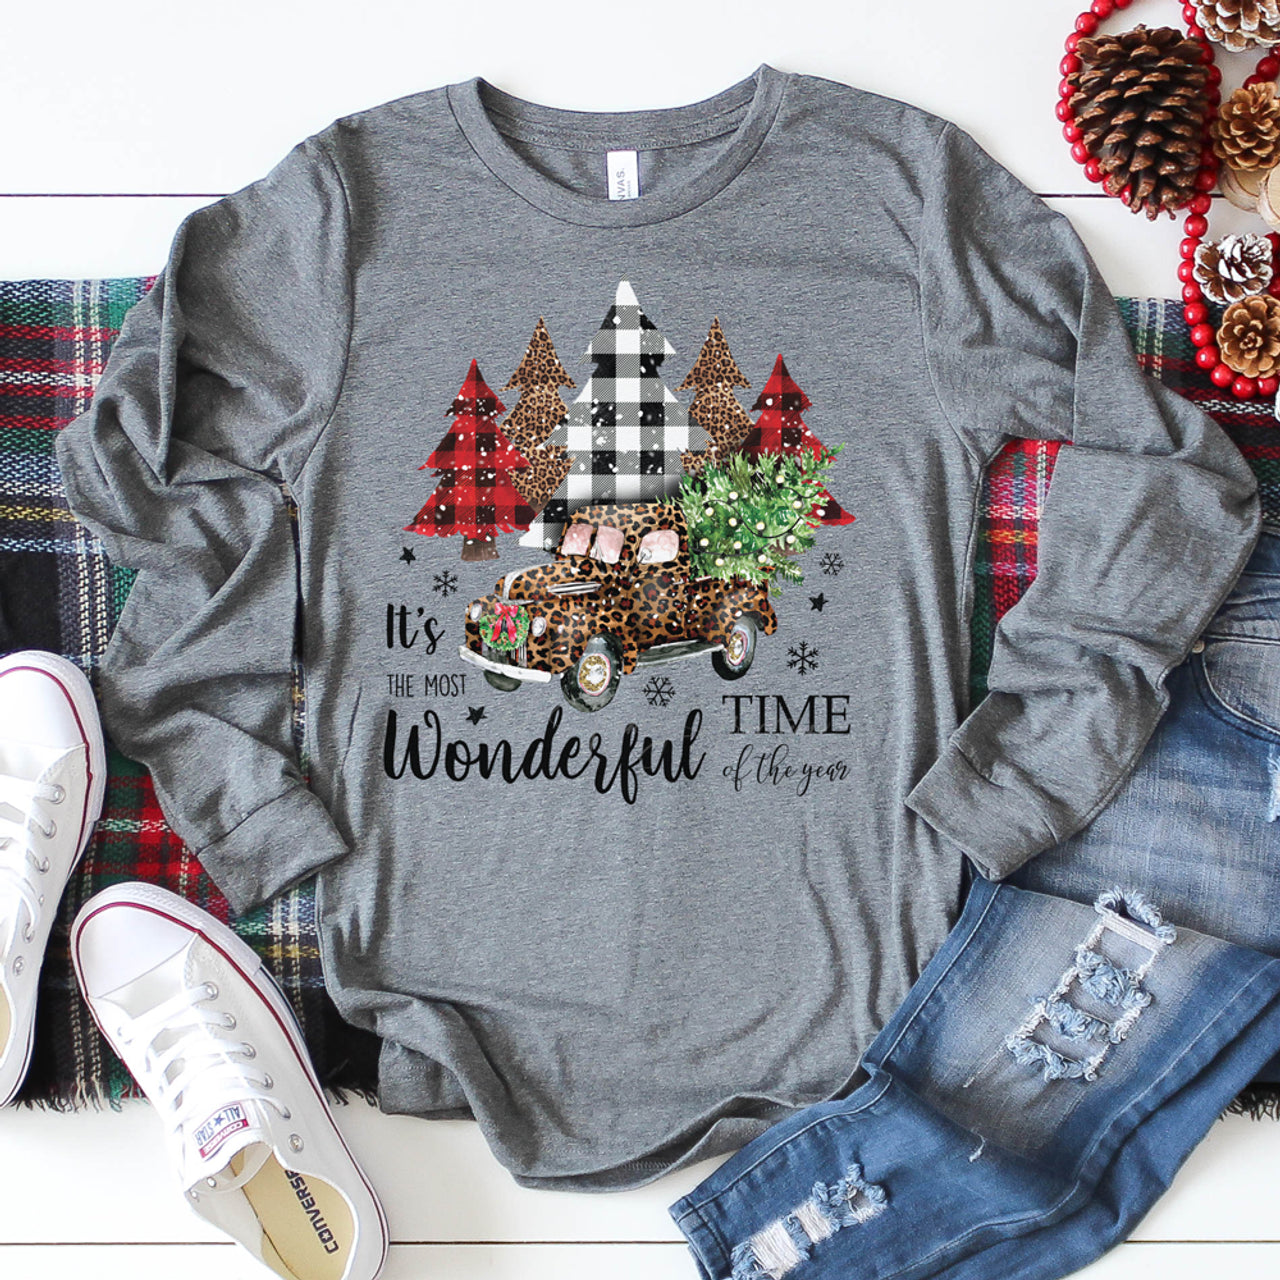 "It's the Most Wonderful Time of the Year" T-shirt (Choose from Short or Long Sleeve)